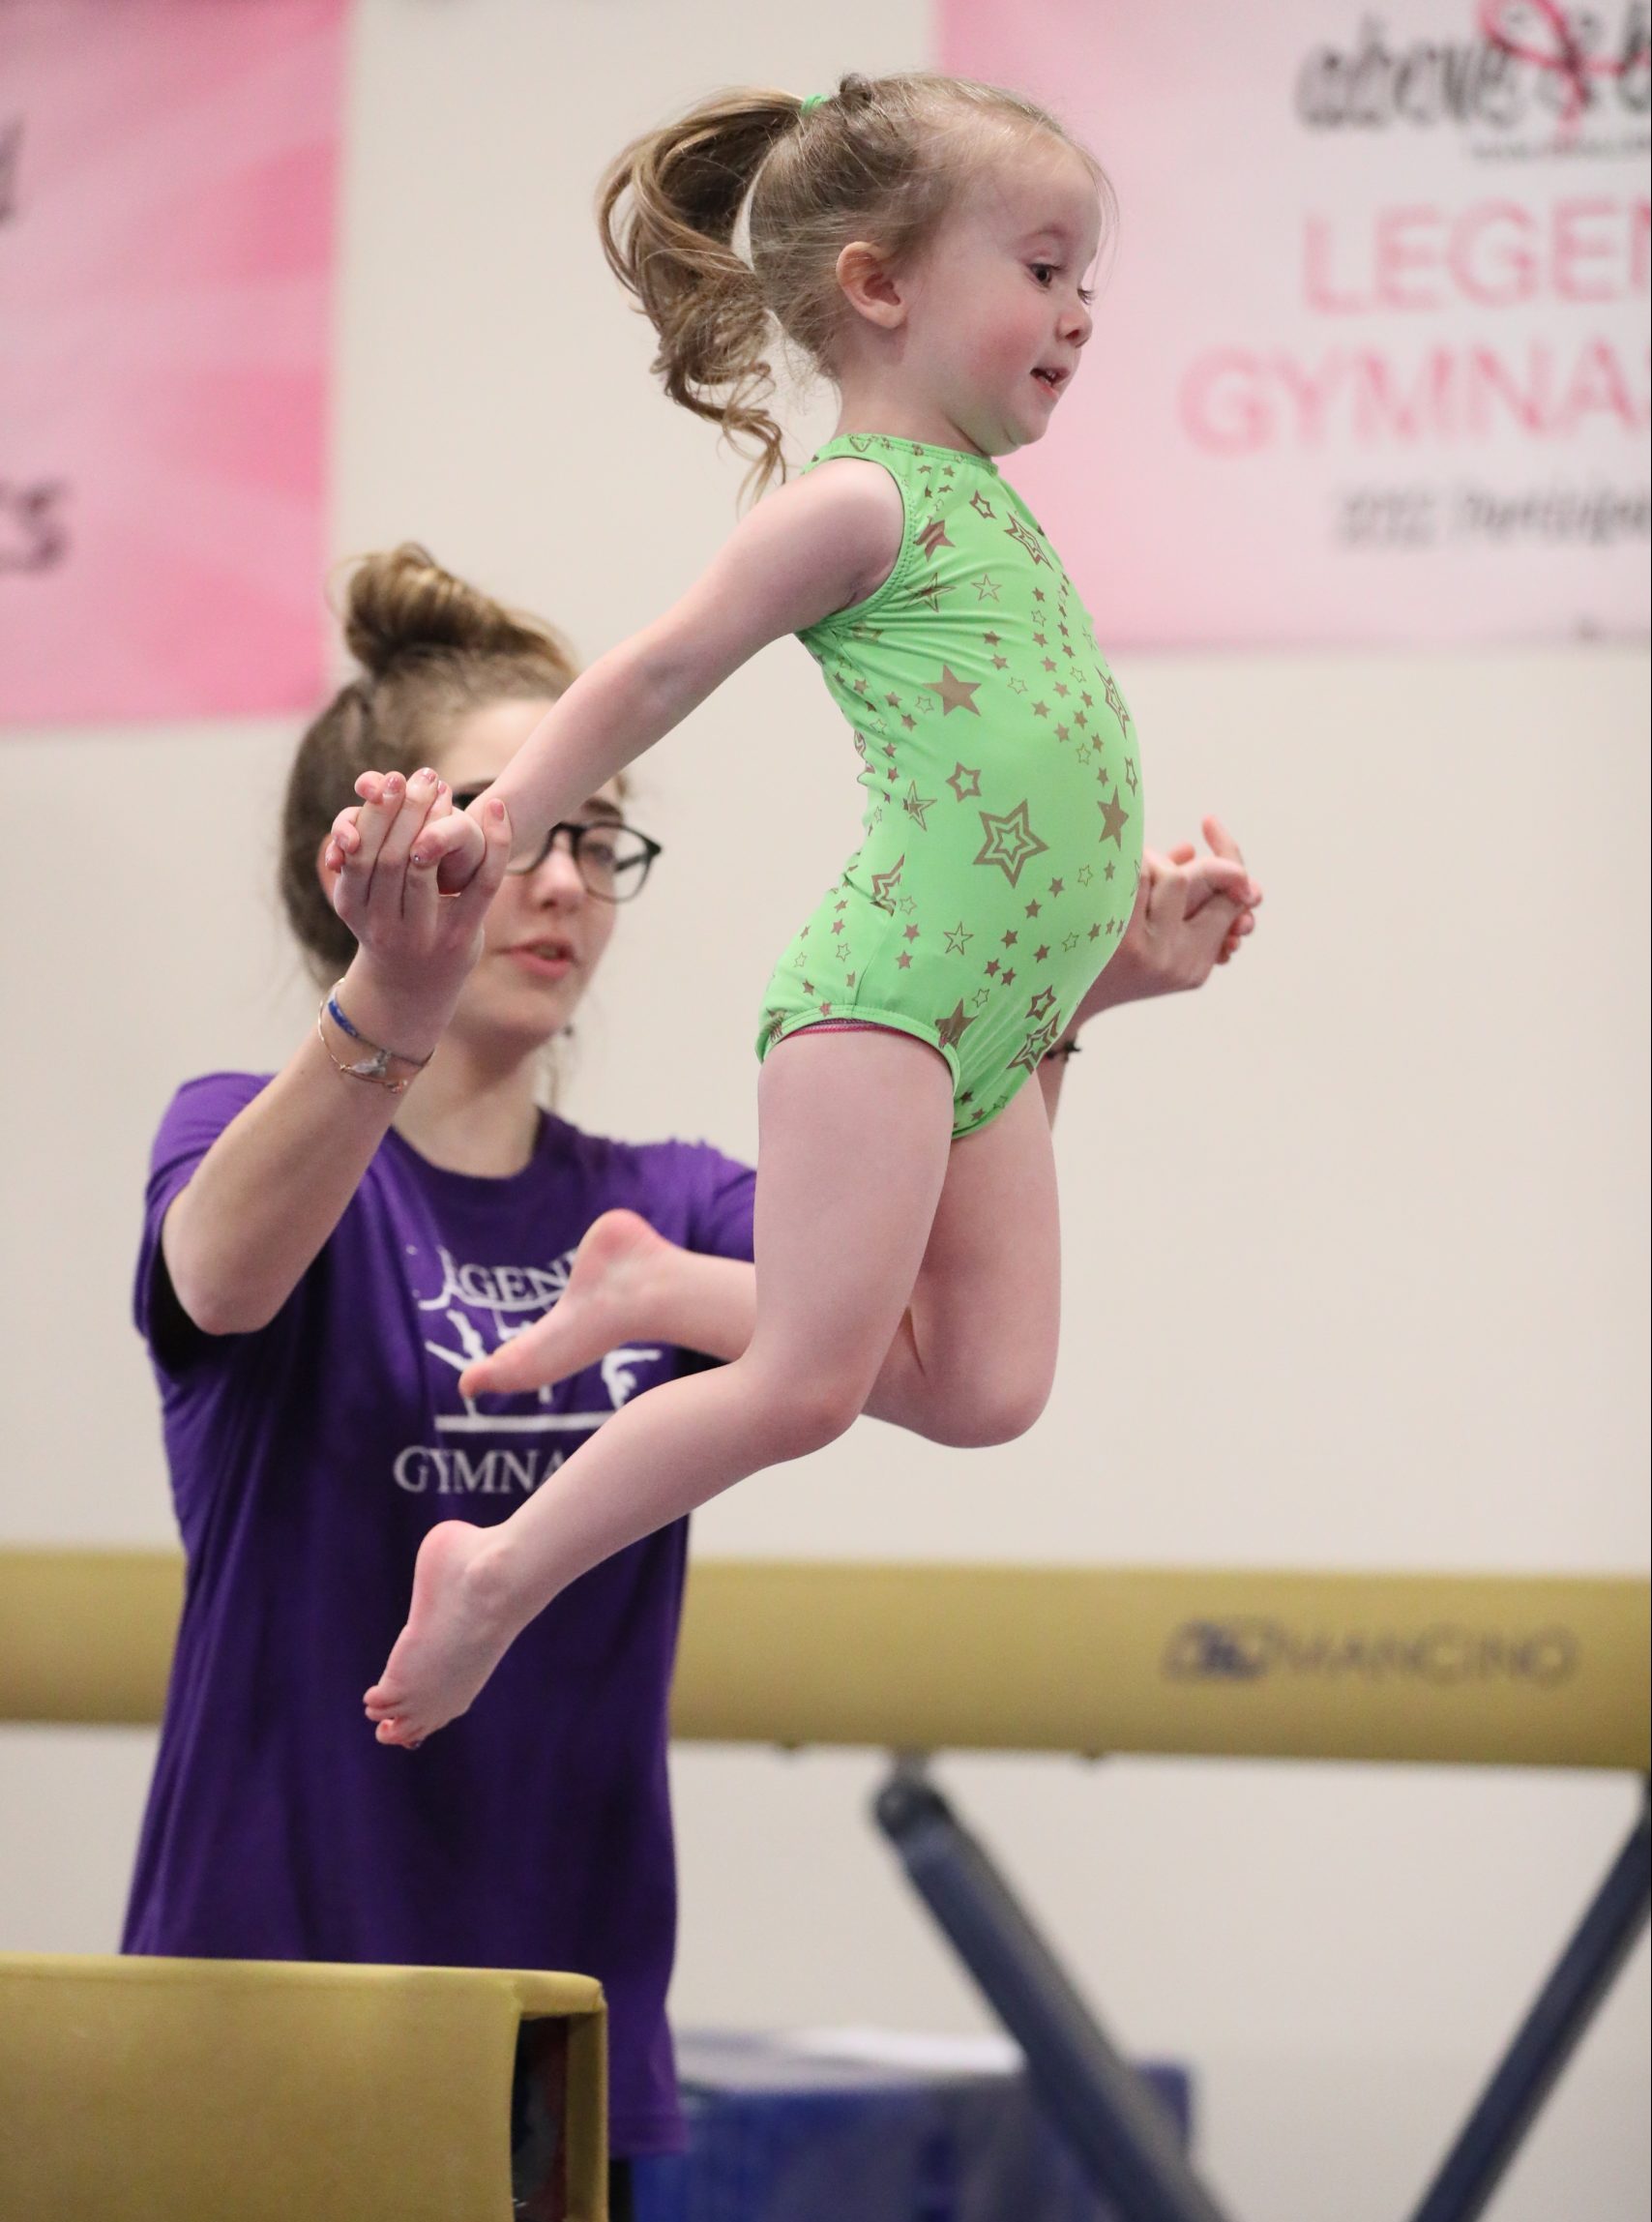 Girl jumping off beam at Legends Gymnastics in North Andover, MA.